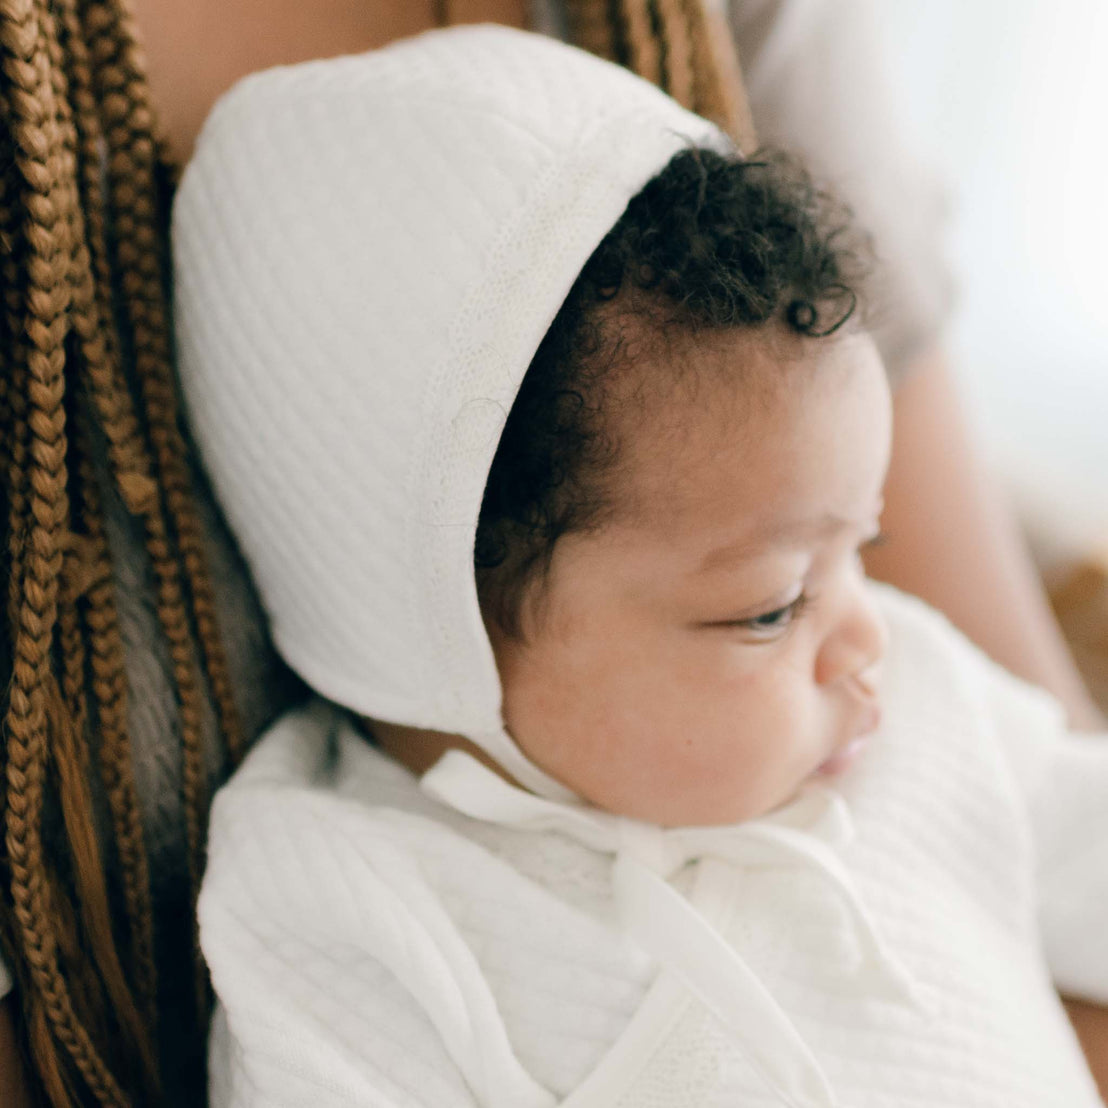 Baby girl with her mother and wearing the Ivory Quinn Quilted Cotton Bonnet. A traditional style bonnet that is lined in coordinating super soft pima cotton and trimmed in a light ivory cotton lace with soft pima cotton ties to secure the bonnet.